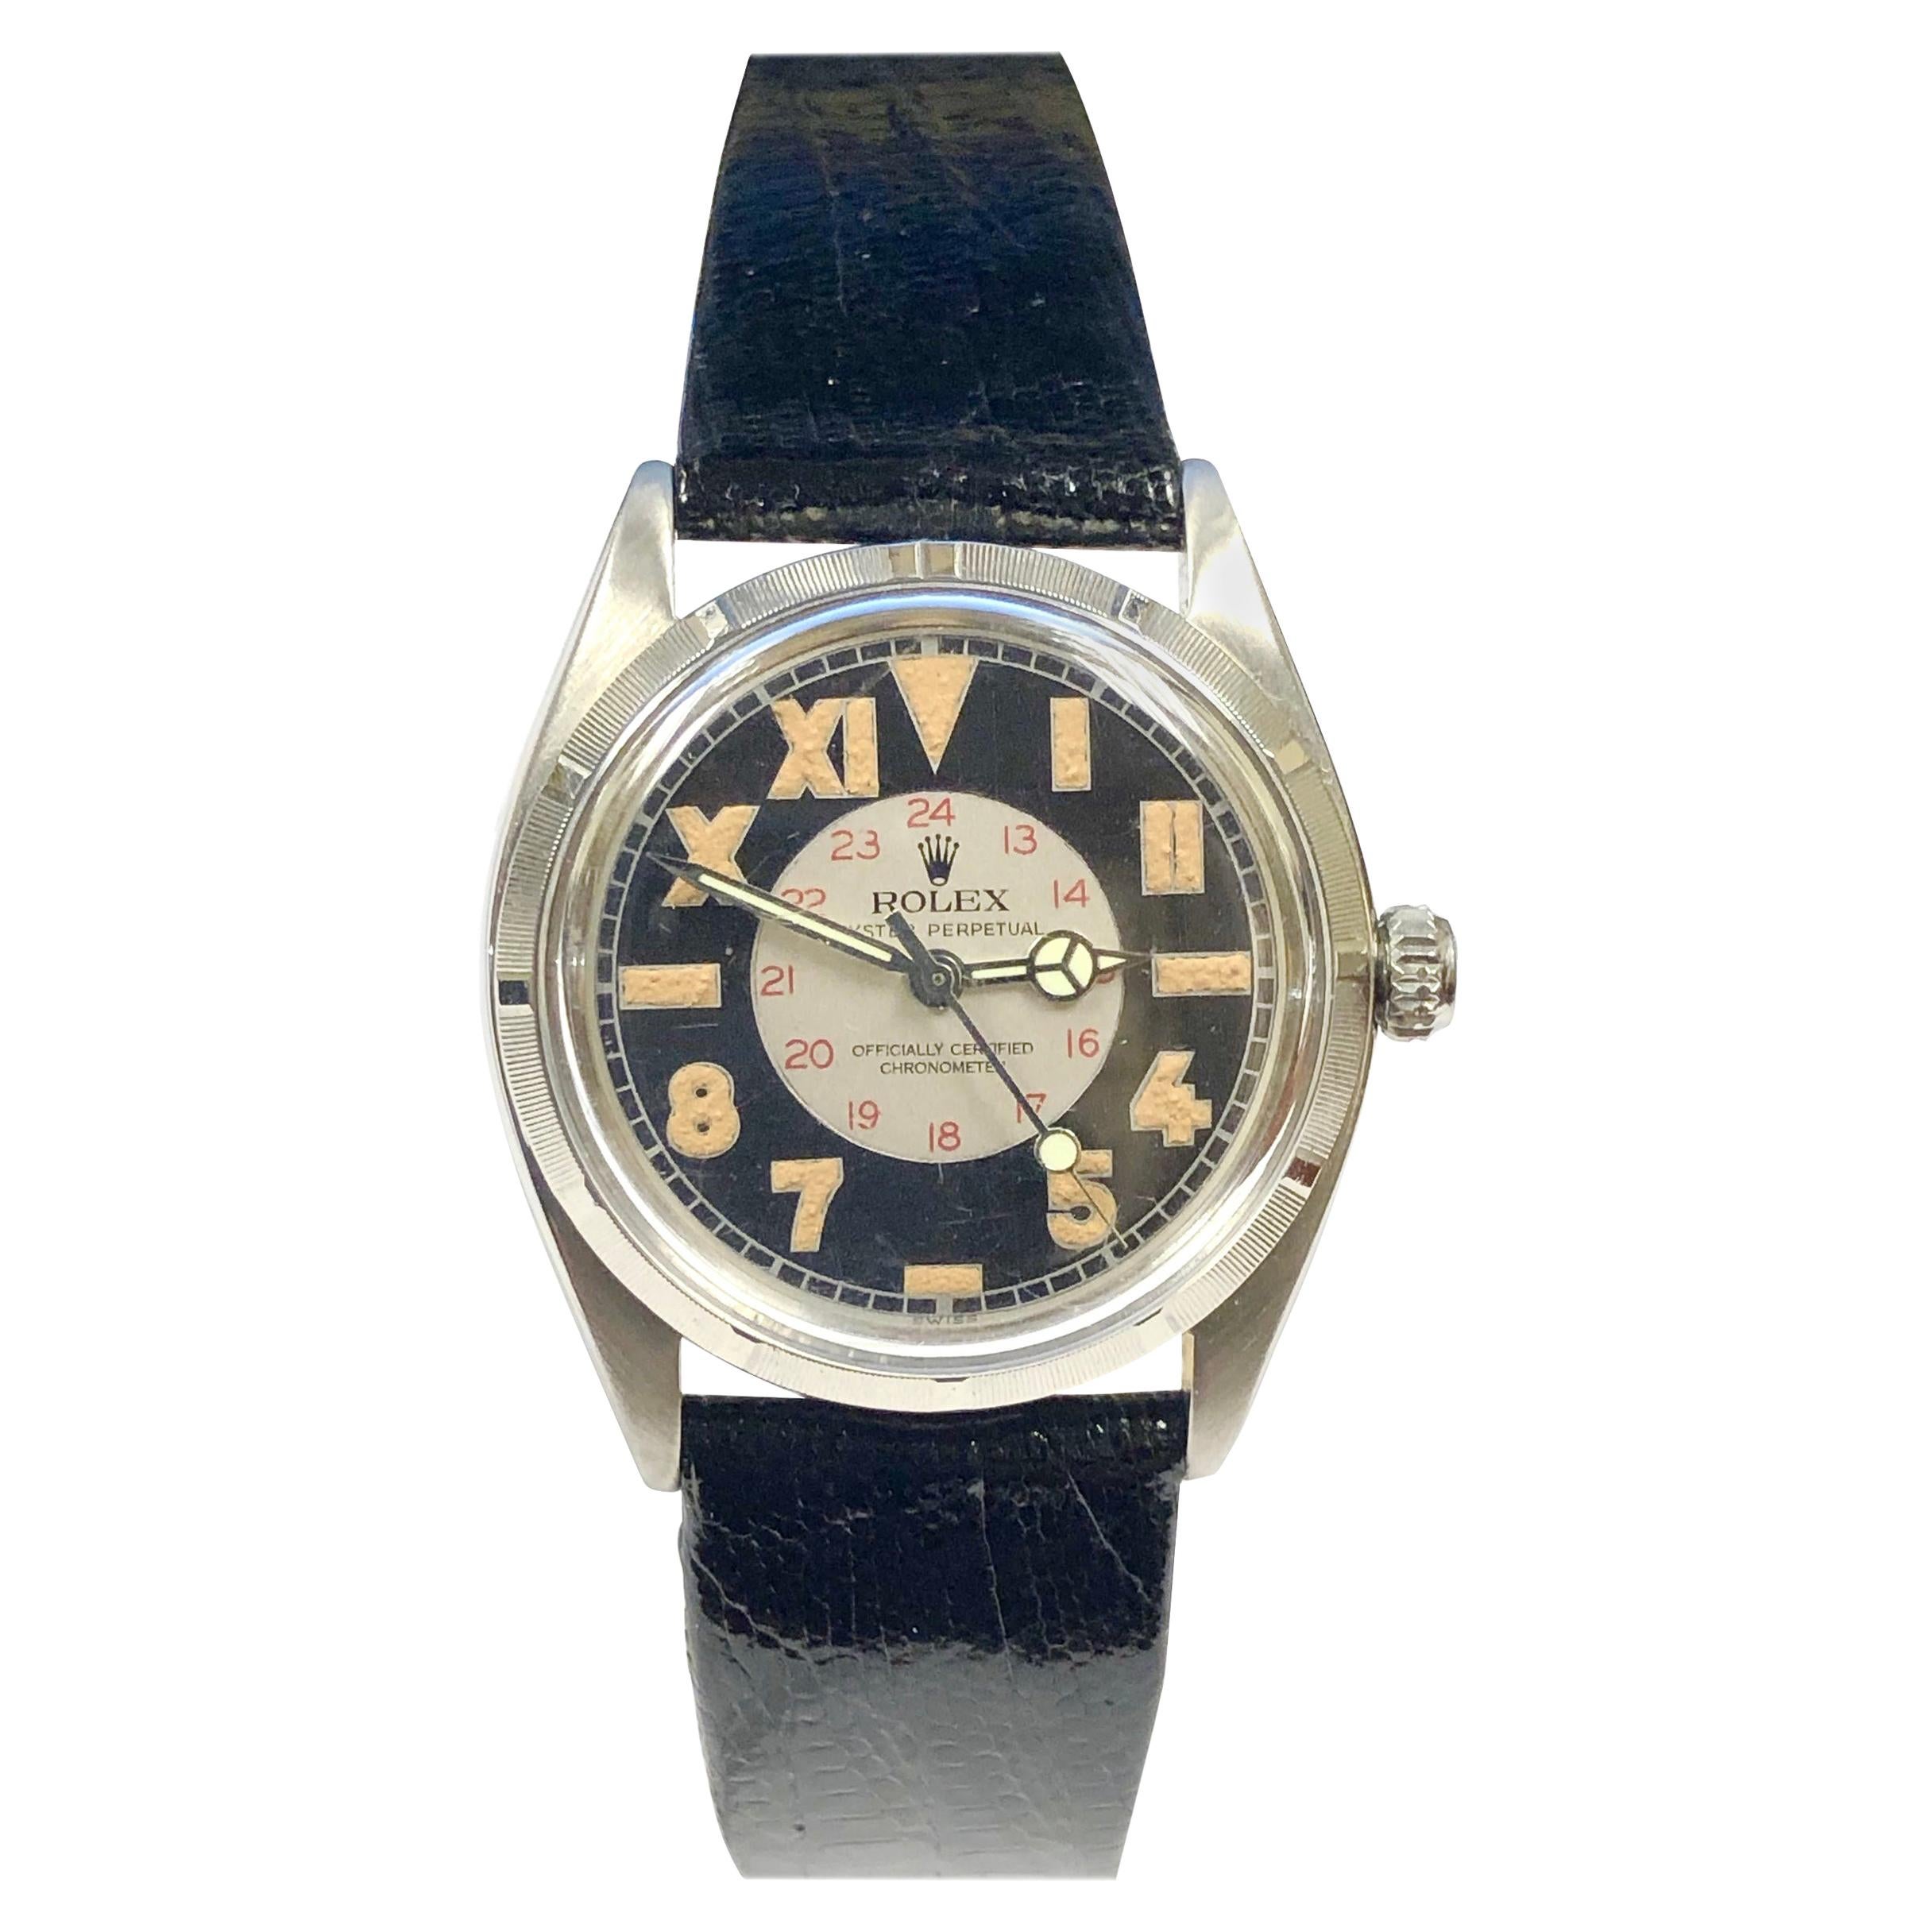 Rolex Vintage 1944 Steel Automatic with Bubble Back Style Military Dial